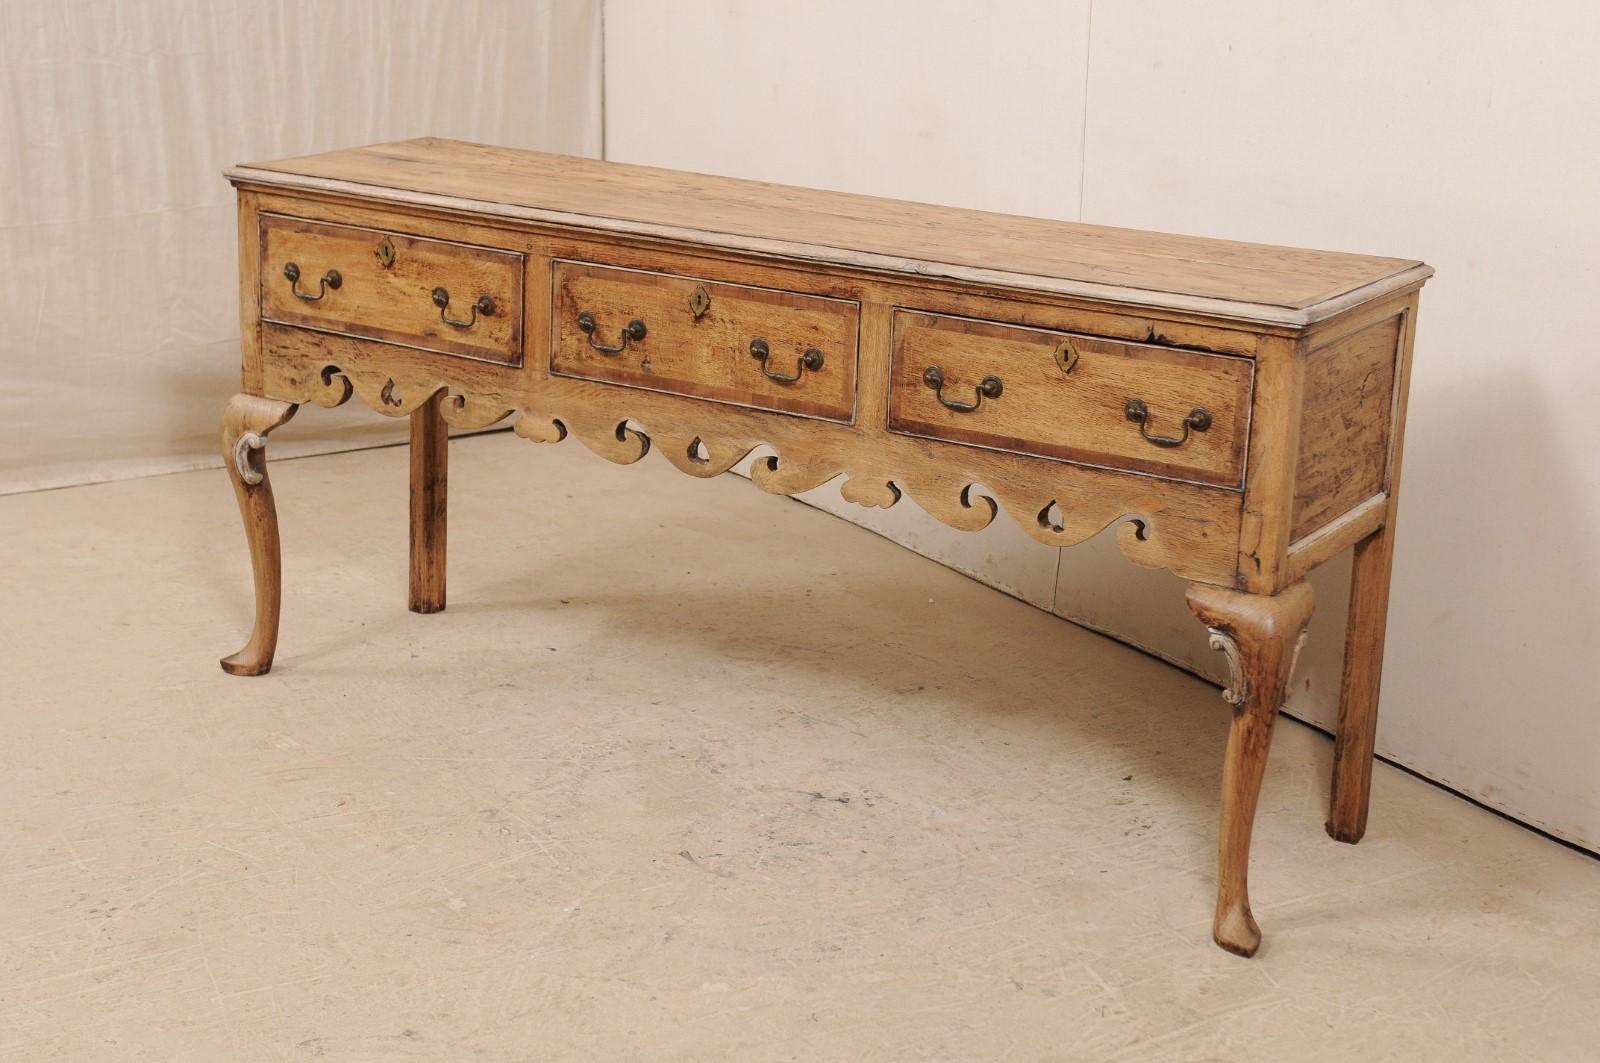 Carved English 19th Century Queen Anne Wood Console Table with Drawers